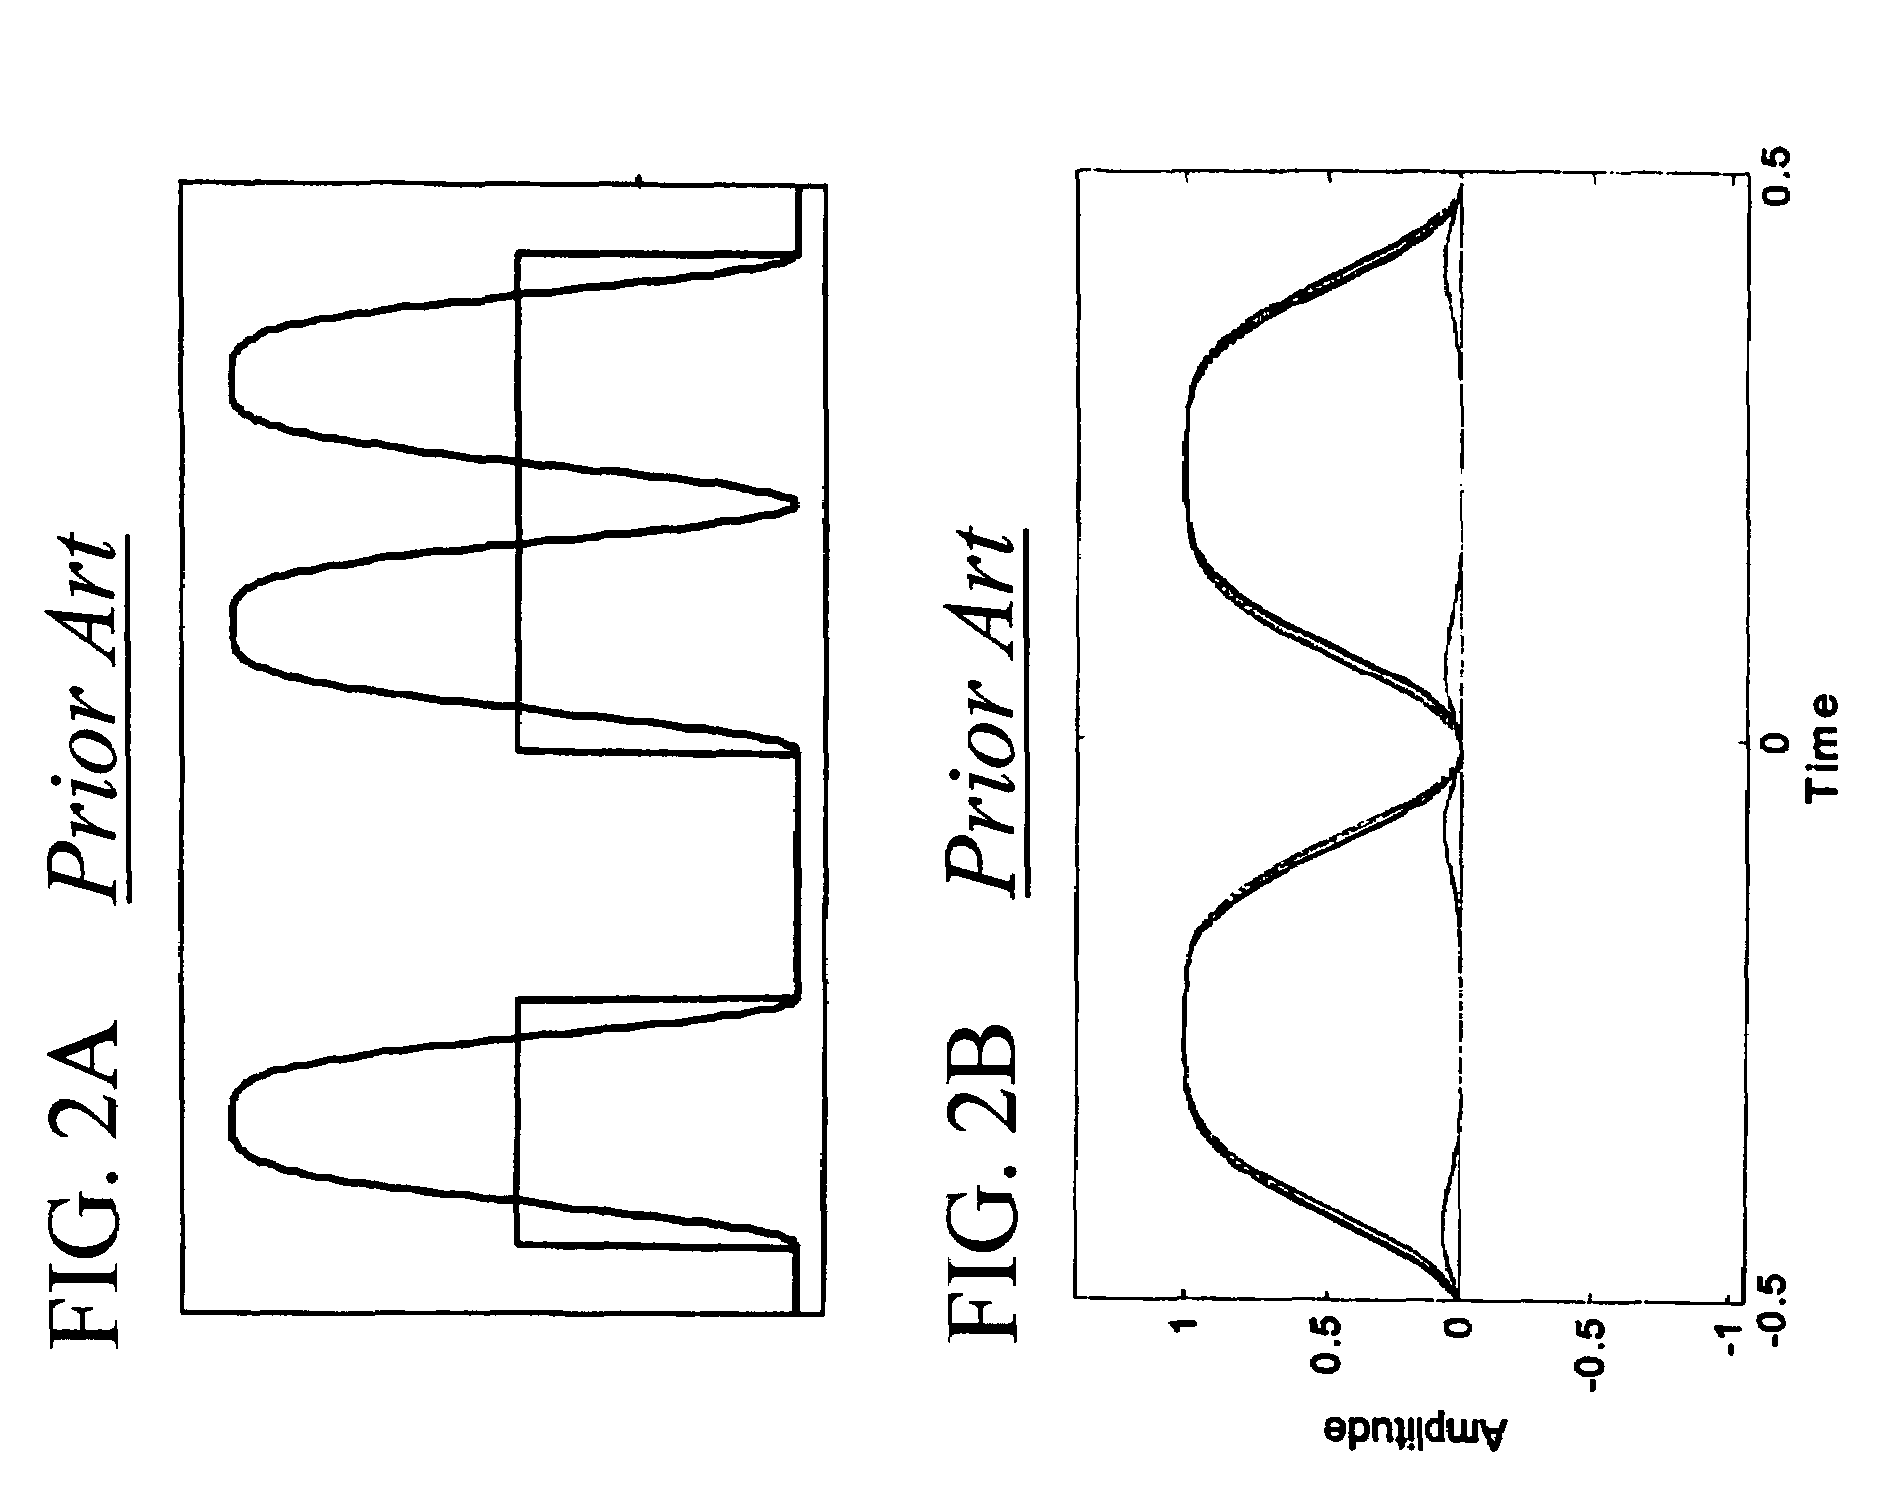 Method and apparatus for controlling modulator phase alignment in a transmitter of an optical communications system